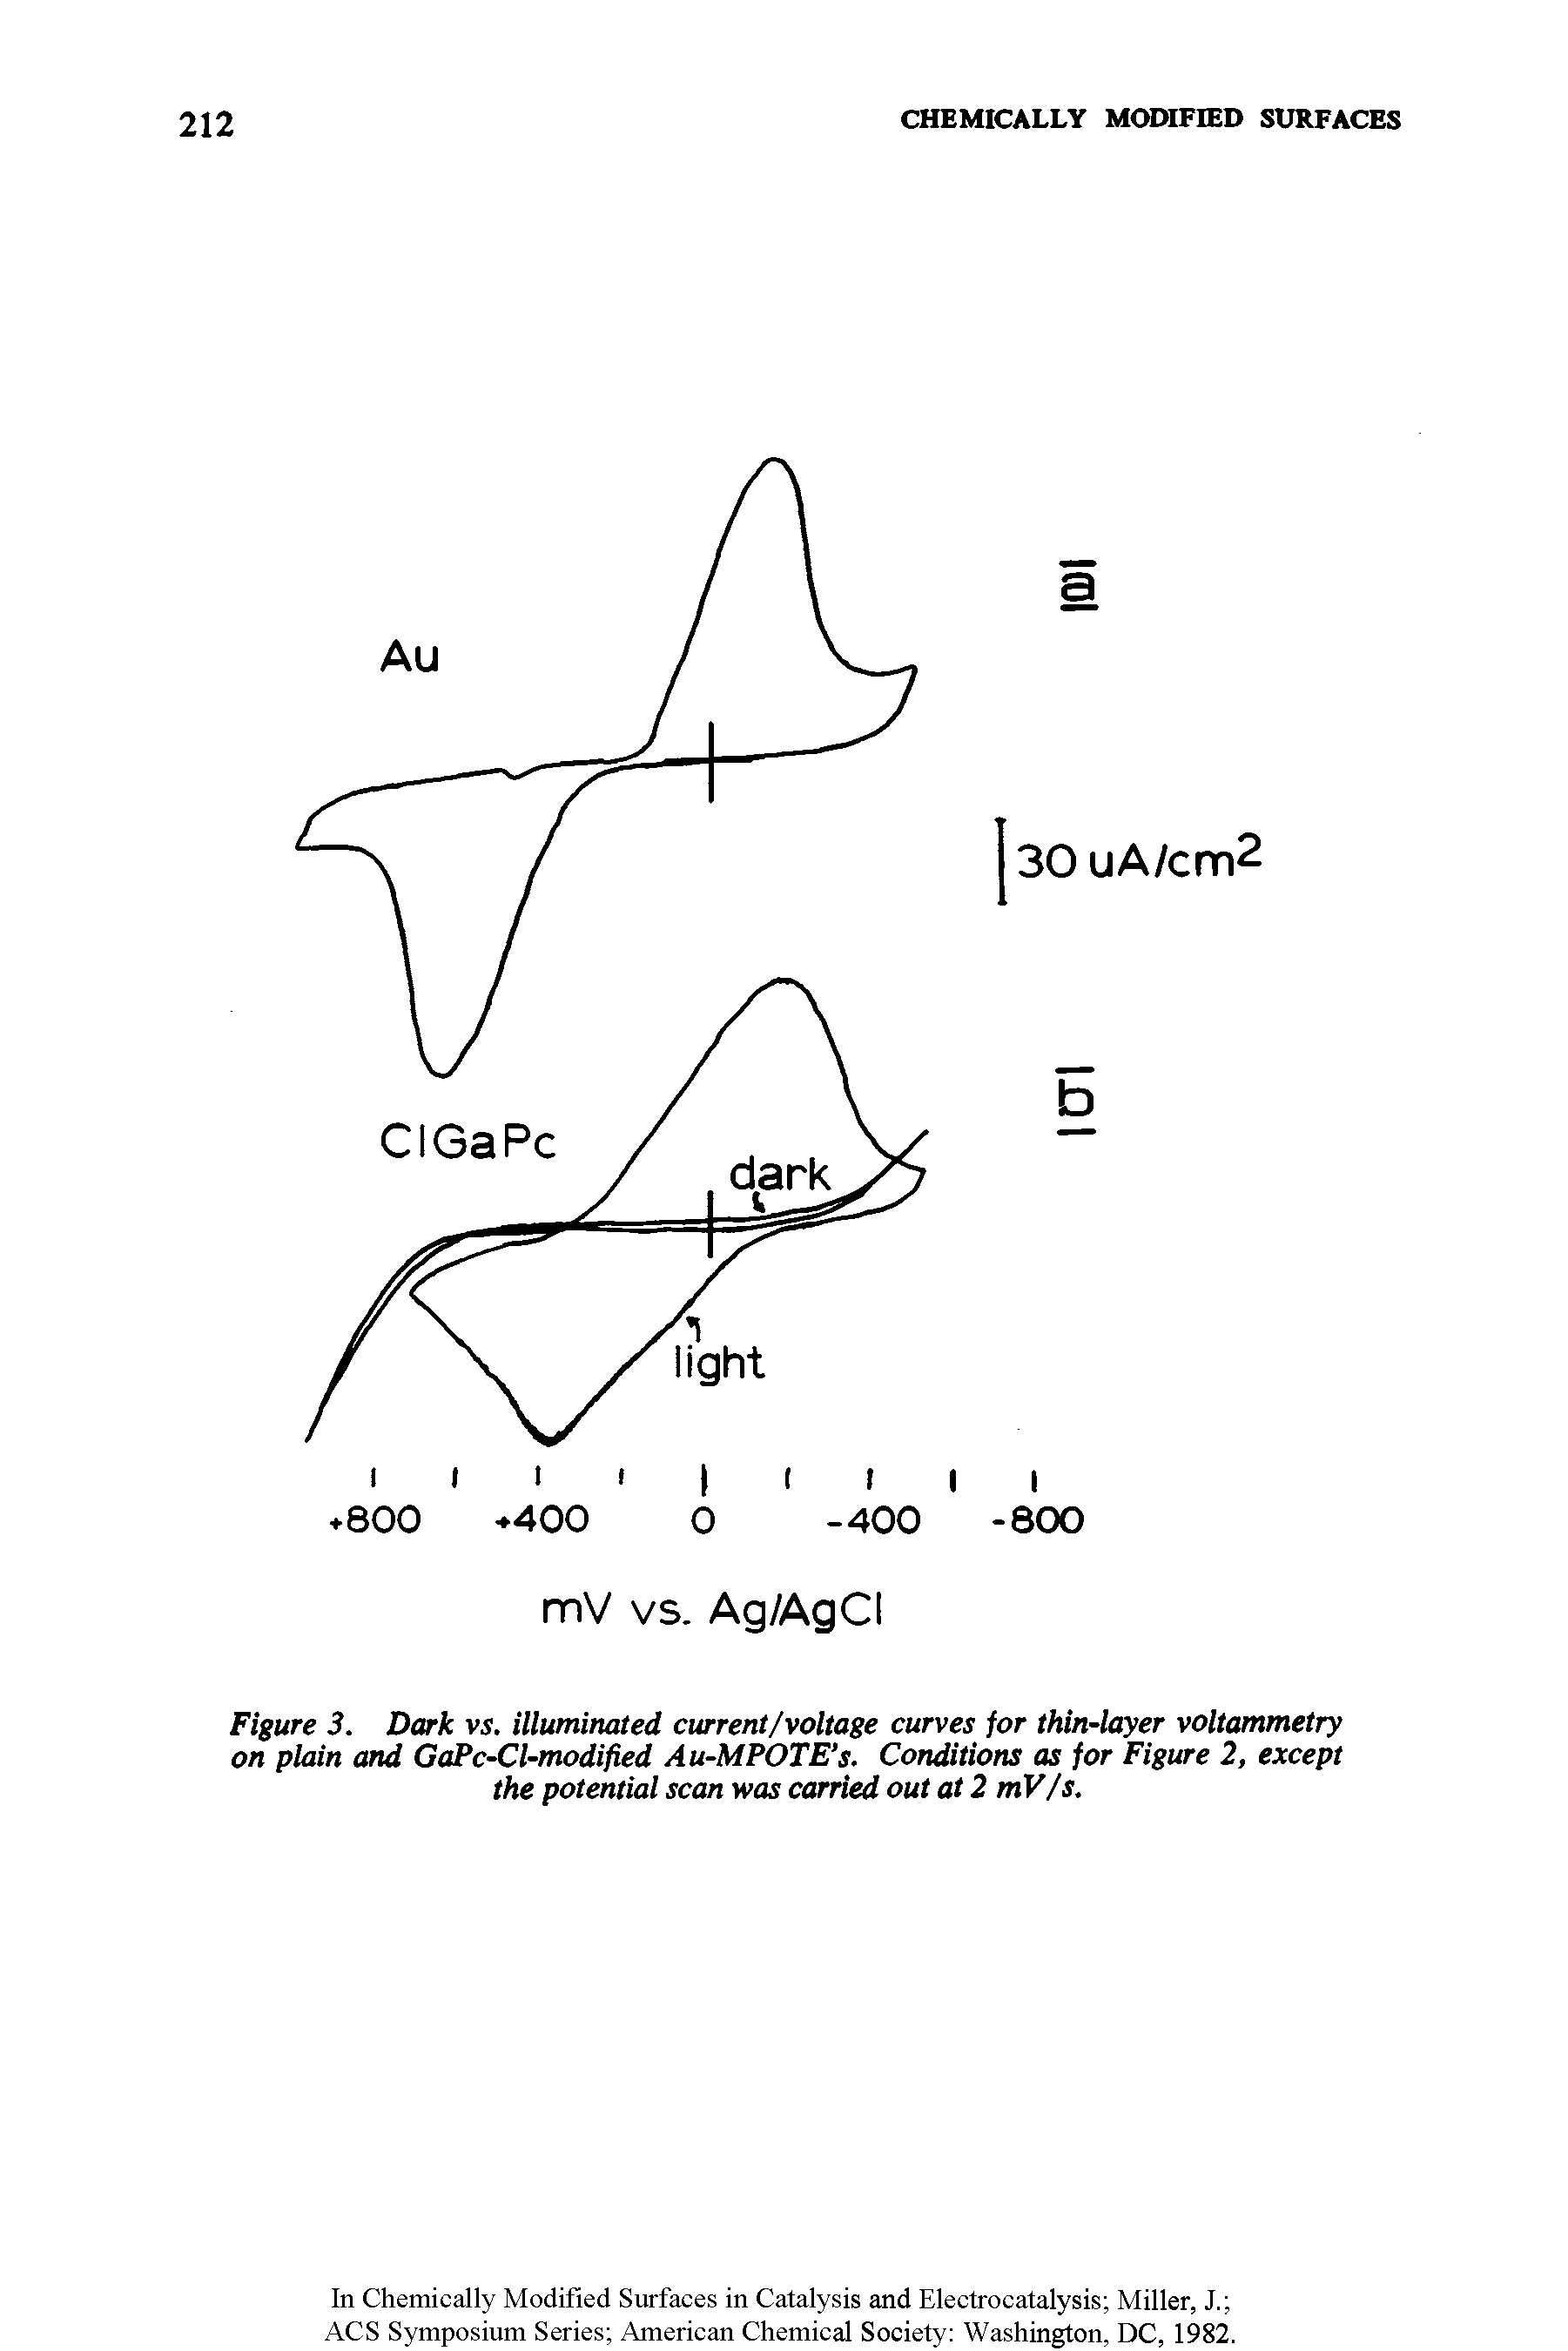 Figure 3. Dark vs. illuminated current/voltage curves for thin-layer voltammetry on plain and GaPc-Cl-modified Au-MPOTE s. Conditions as for Figure 2, except the potential scan was carried out at 2 mV/s.